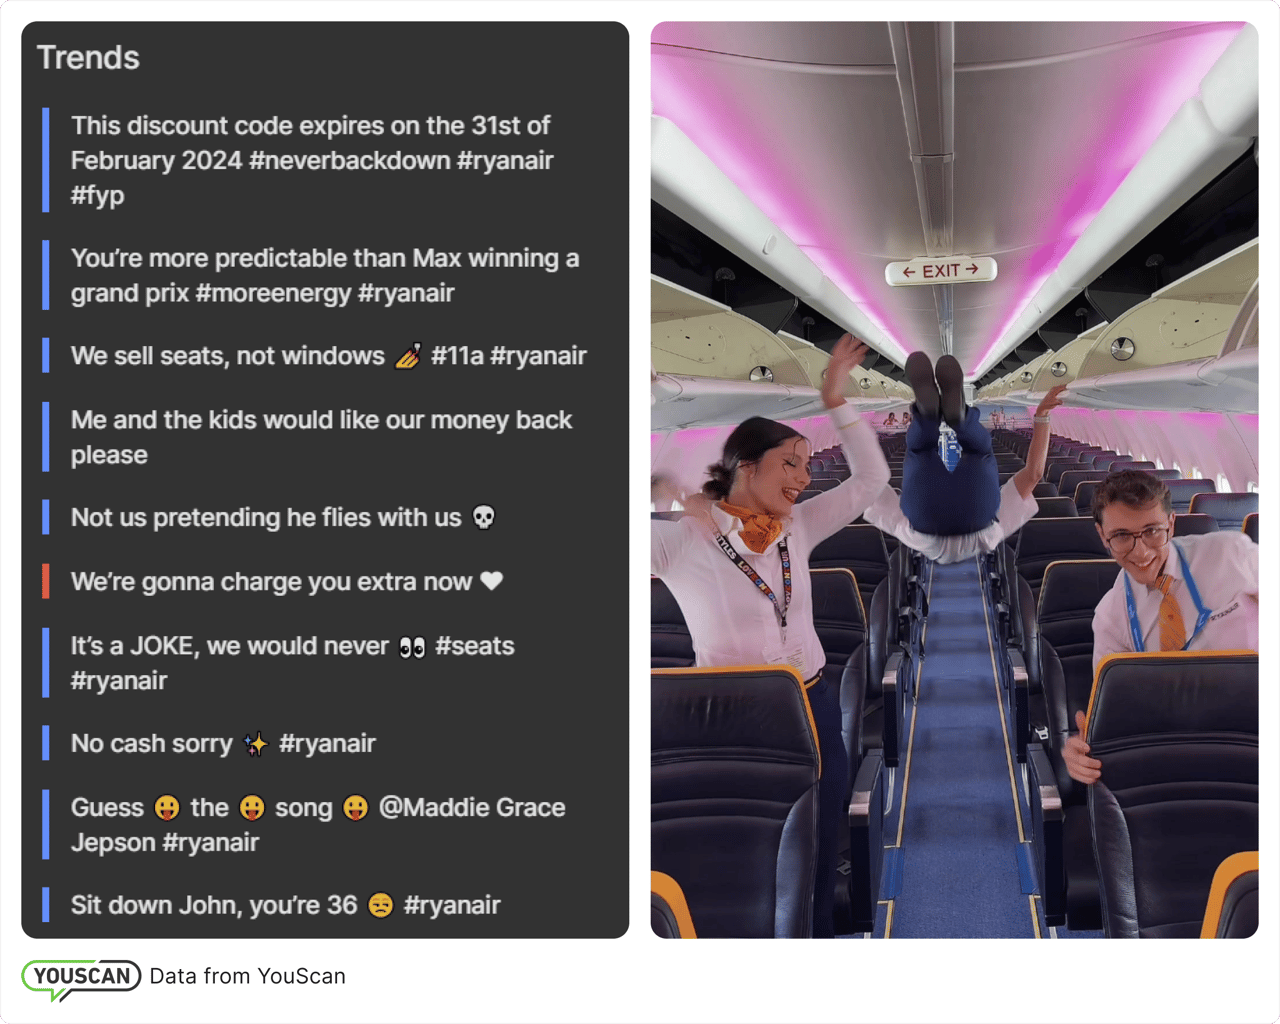 Trending discussions about Ryanair